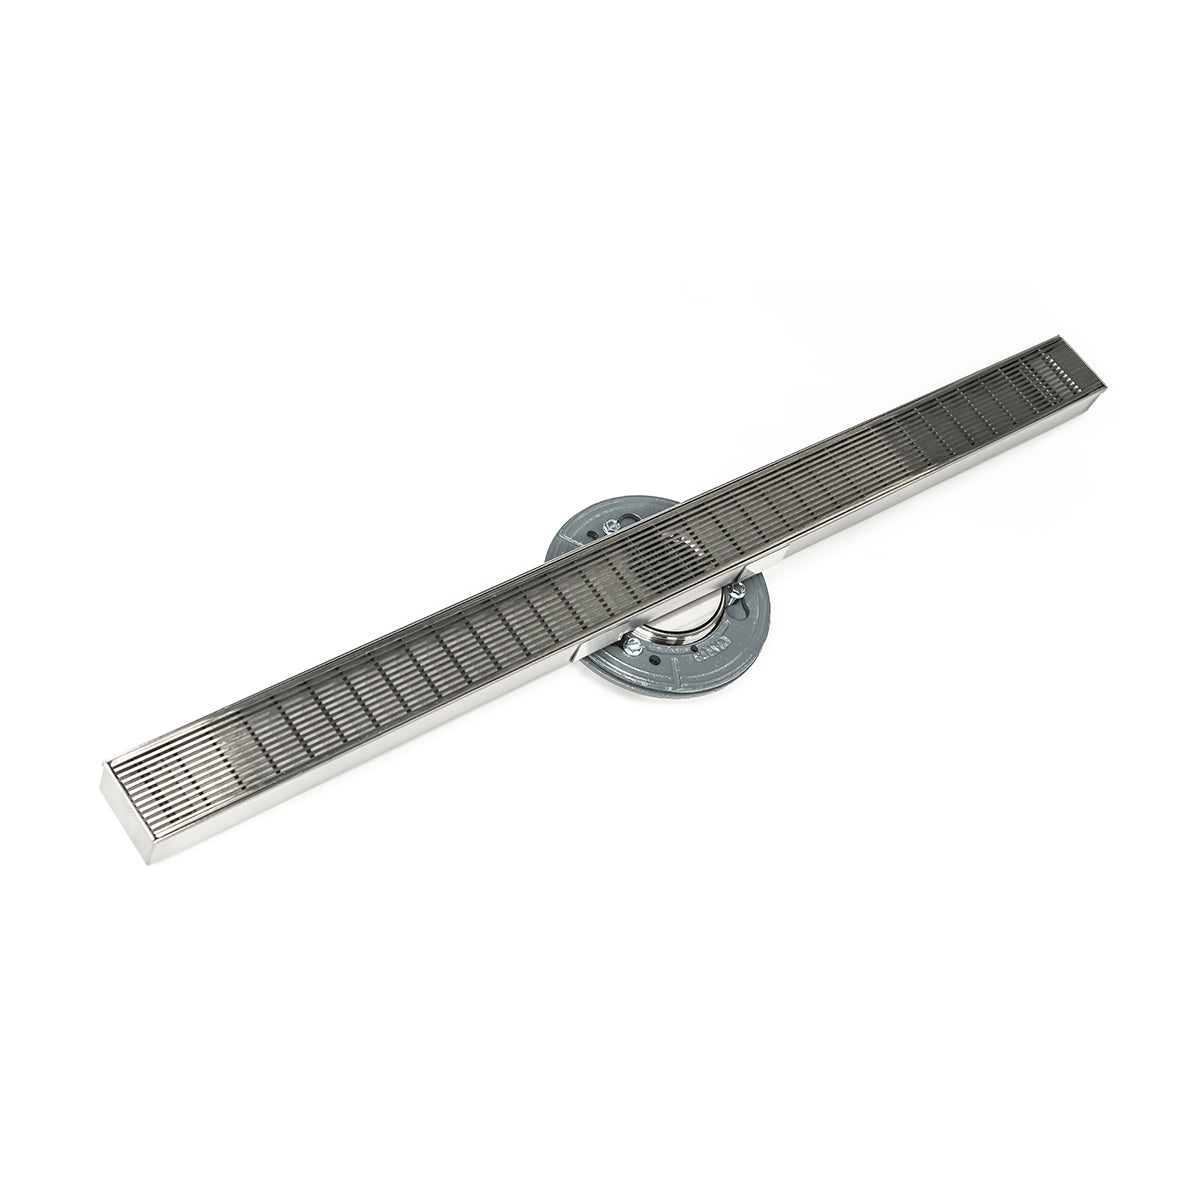 Infinity Drain 72" S-Stainless Steel Series High Flow Site Sizable Linear Drain Kit with 2 1/2" Wedge Wire Grate with Cast Iron Drain Body, 3" No Hub Outlet